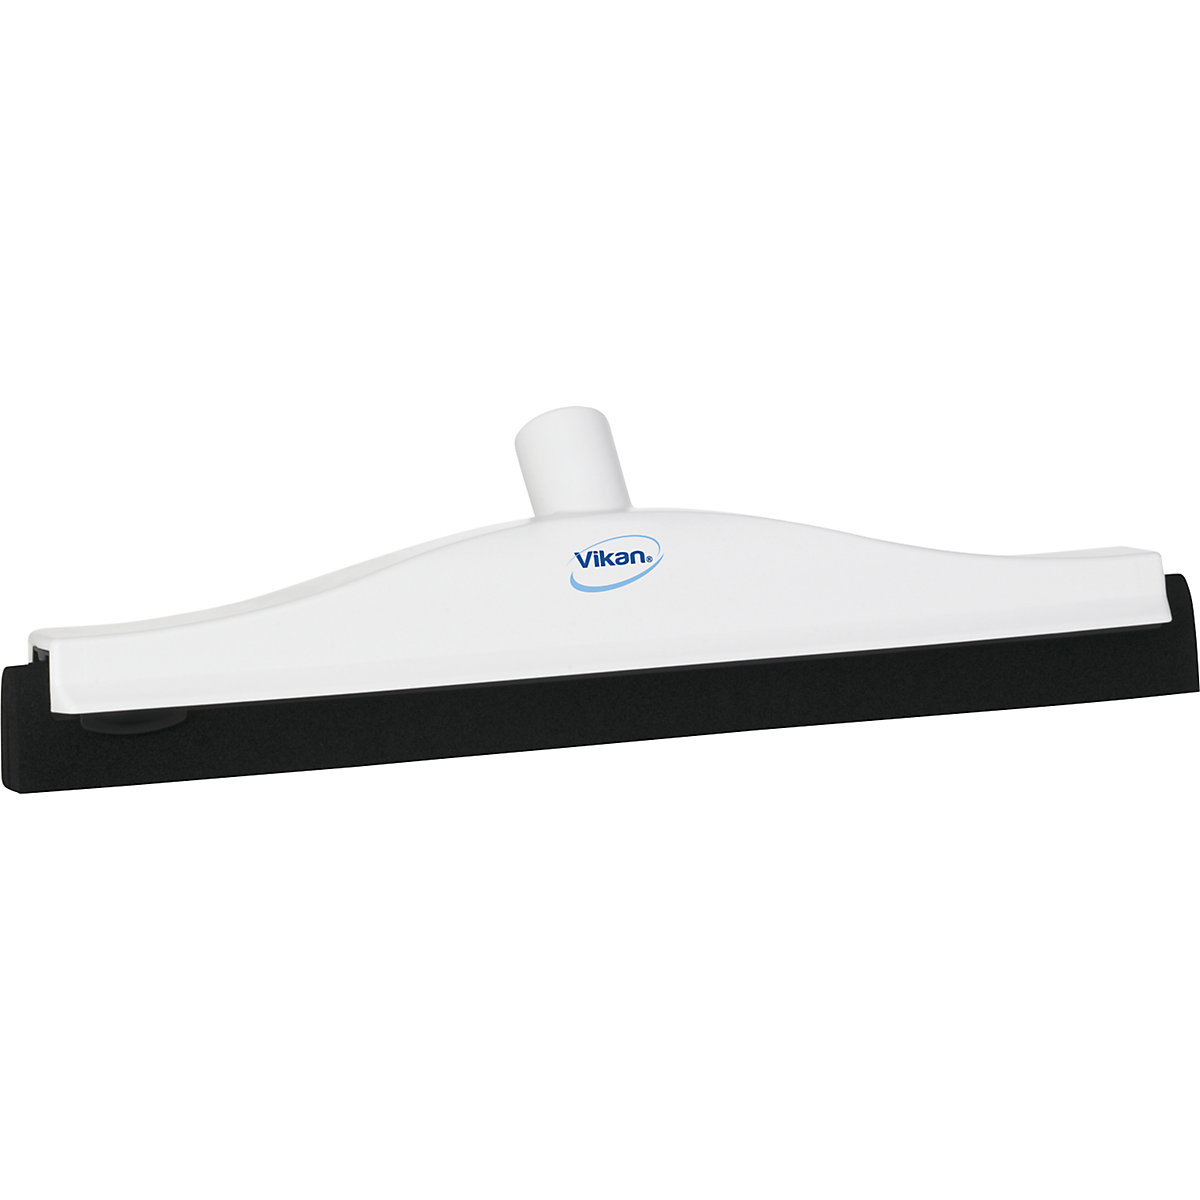 Water wiper with replaceable cartridge – Vikan, length 400 mm, pack of 10, white-6